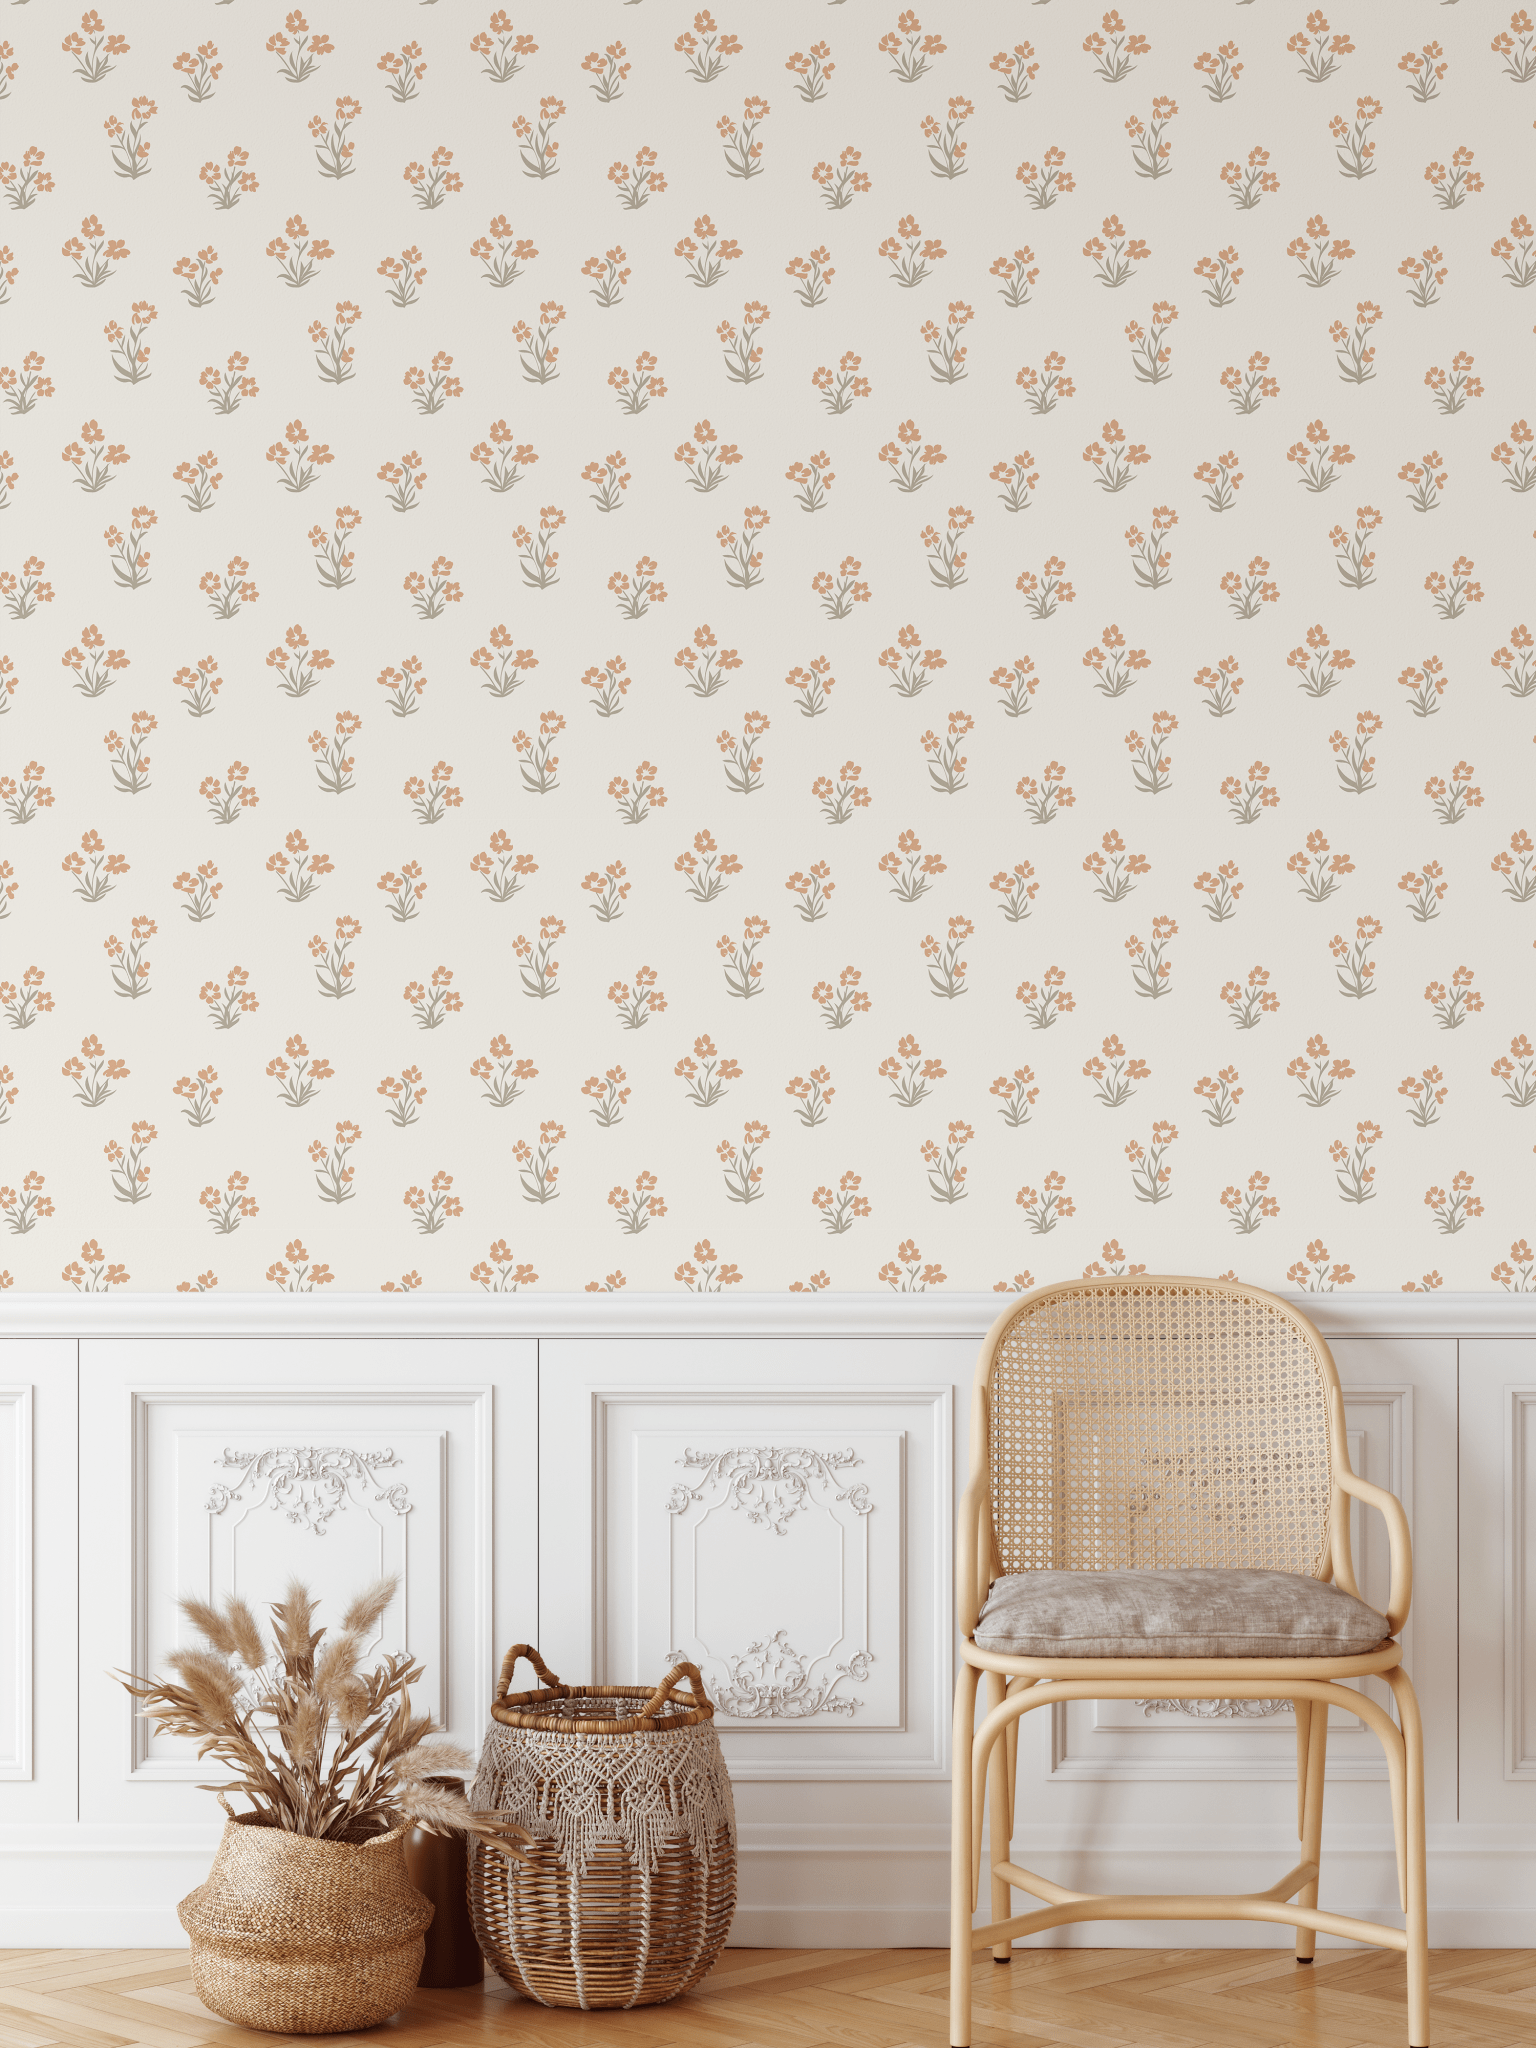 Sage sprig peel and stick wallpaper in a fresh, neutral tone enhances a traditional entryway with wainscoting.